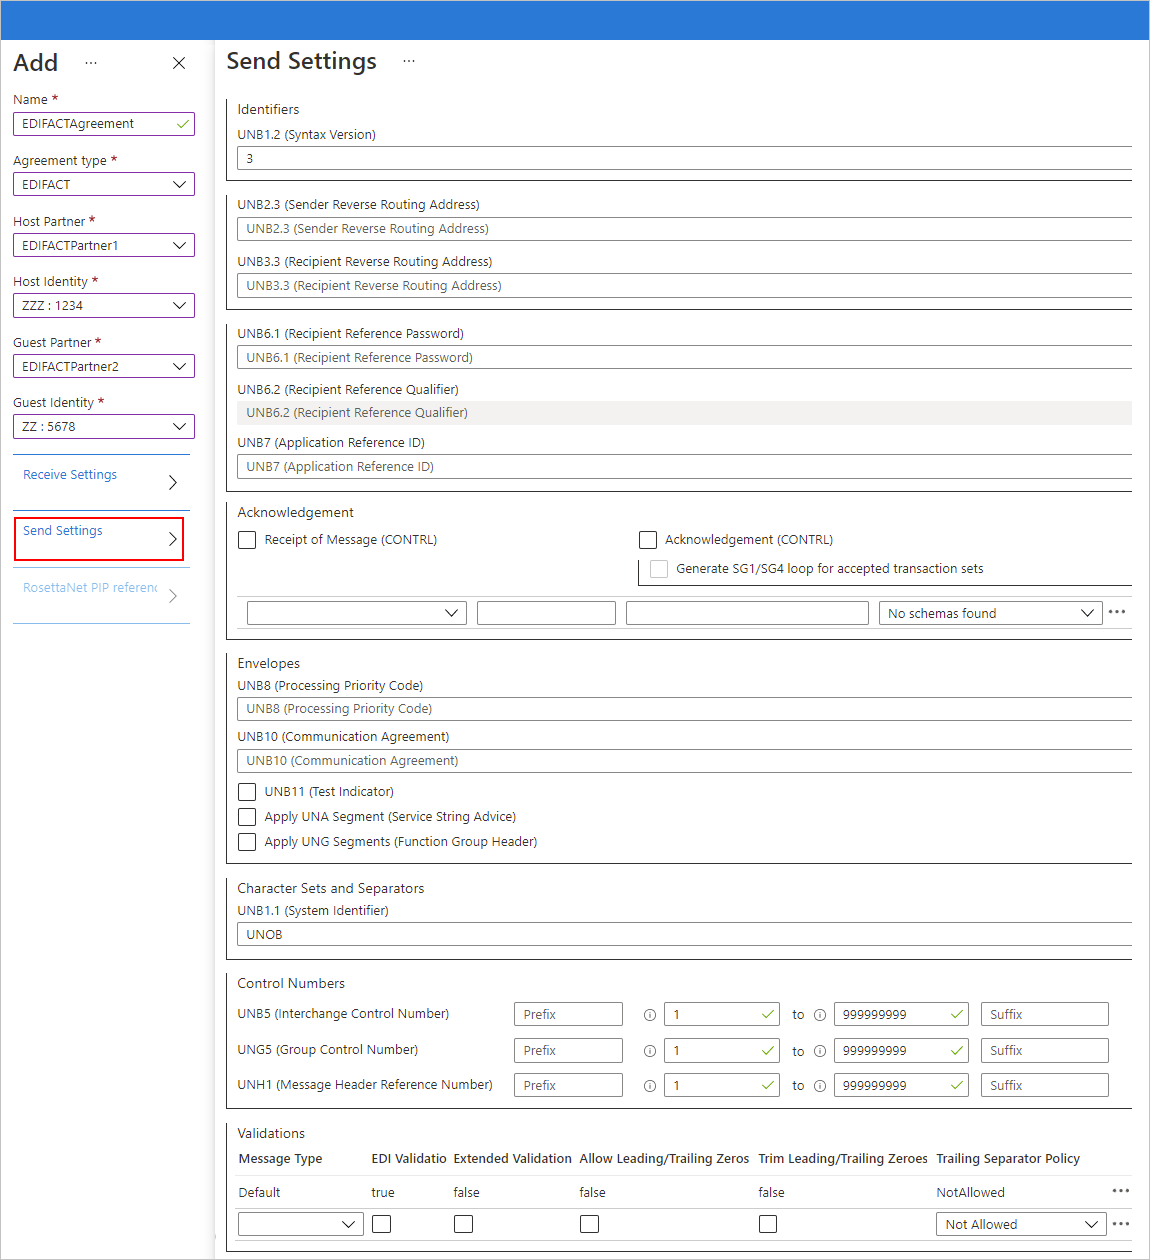 Screenshot showing Azure portal and EDIFACT agreement settings for outbound messages.